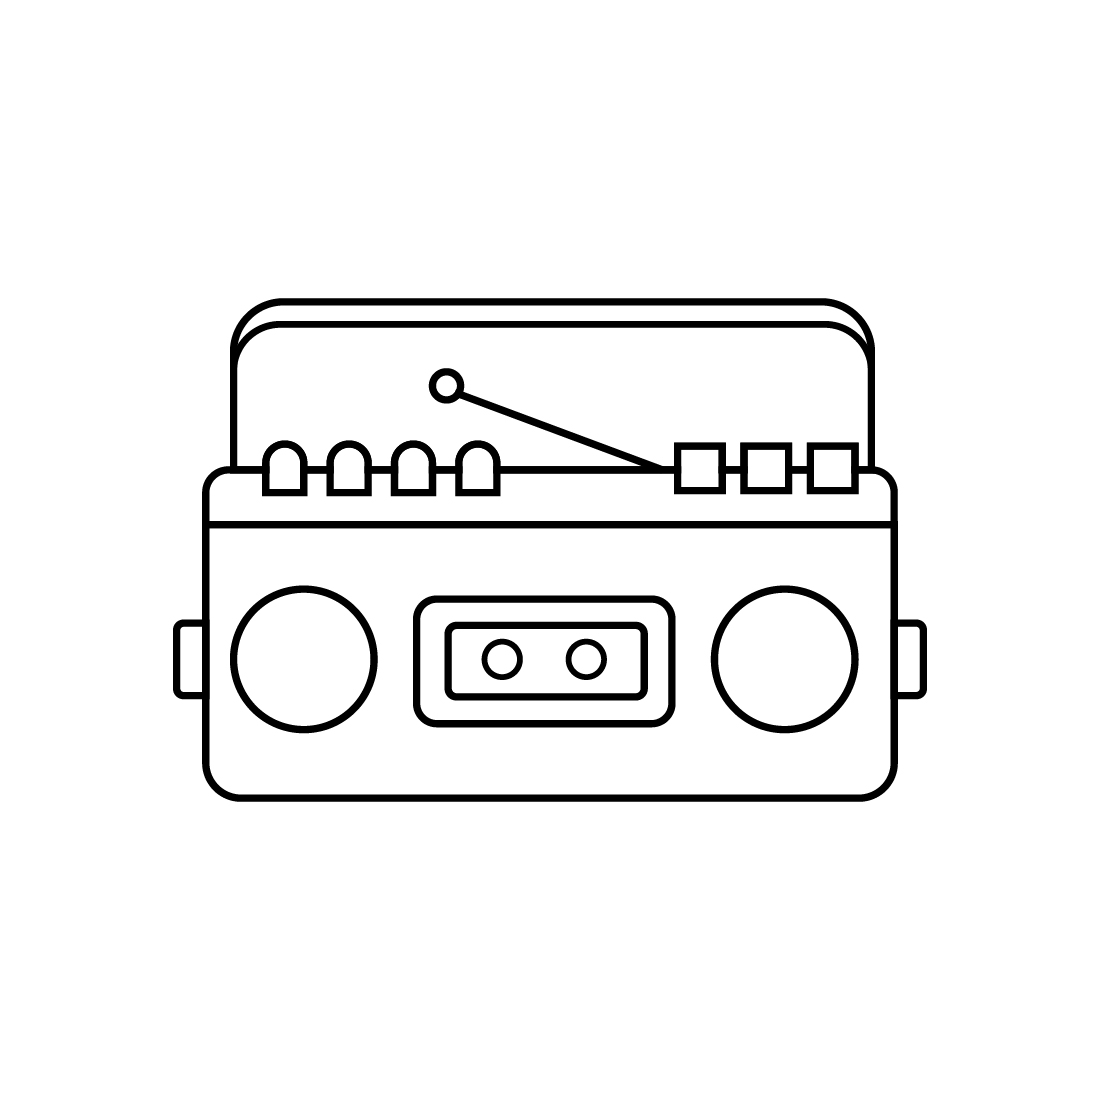 Black and white line drawing of a radio.